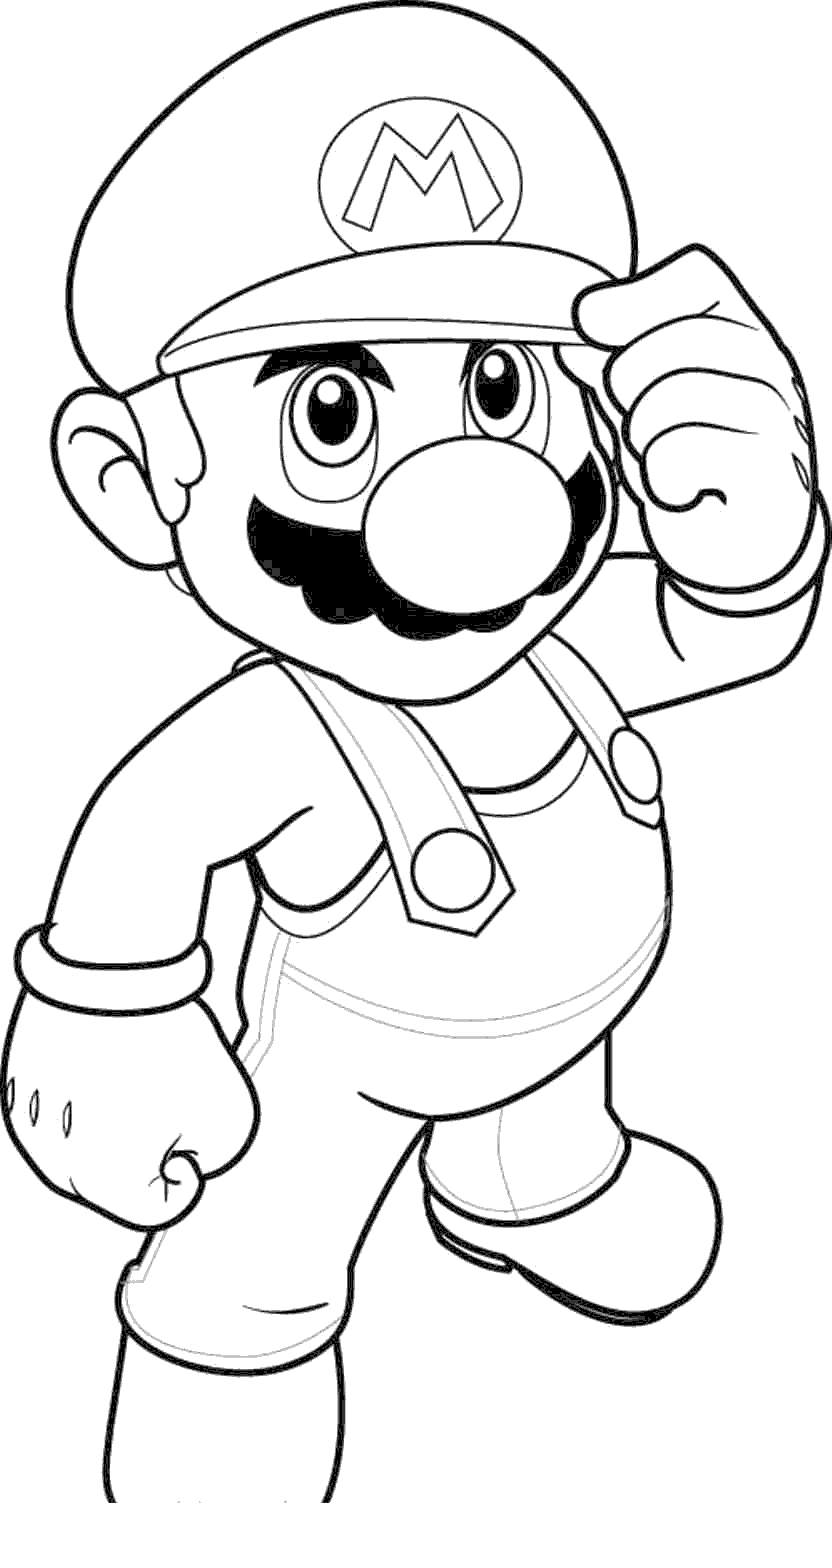 Free Super Smash Bros Coloring Pages Mario With Hat printable